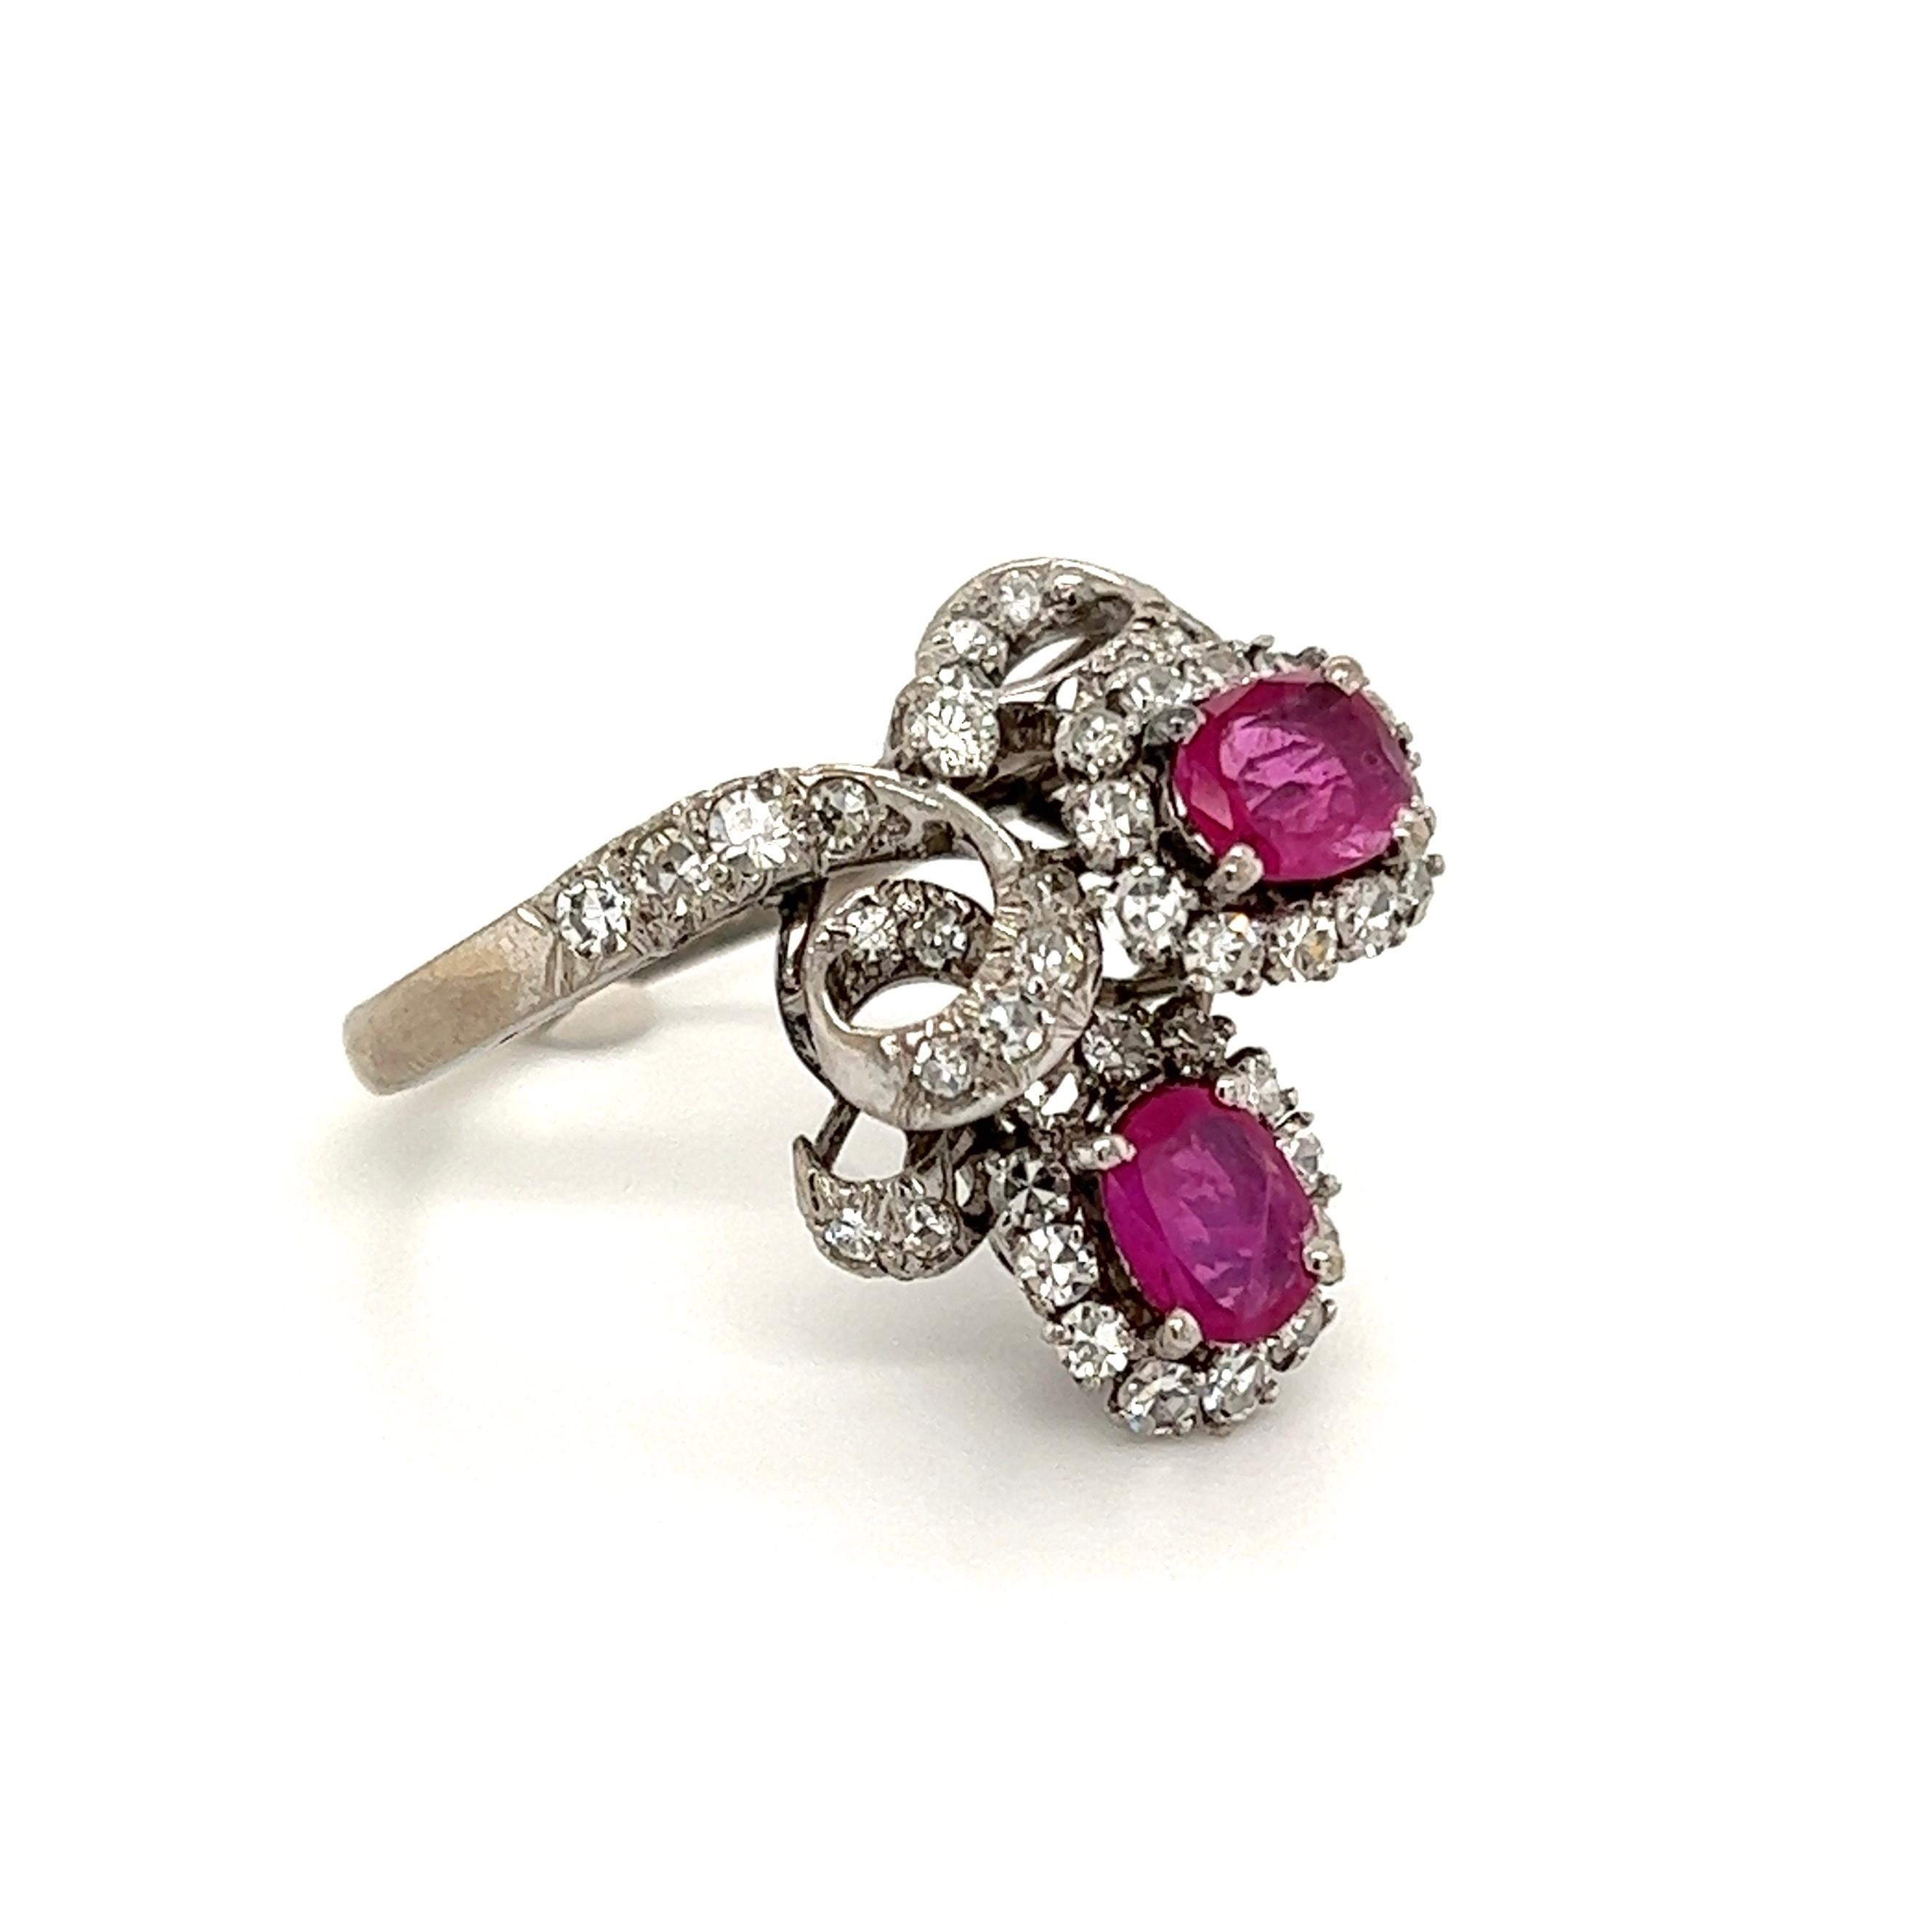 Simply Beautiful! Finely crafted 2-Stone Ruby and Diamond Cluster Ring. Securely Hand set with 2 oval Rubies, weighing approx. 1.50tcw, surrounded by 44 Single cut Diamonds weighing approx. 1.10tcw. Dimensions 1.11